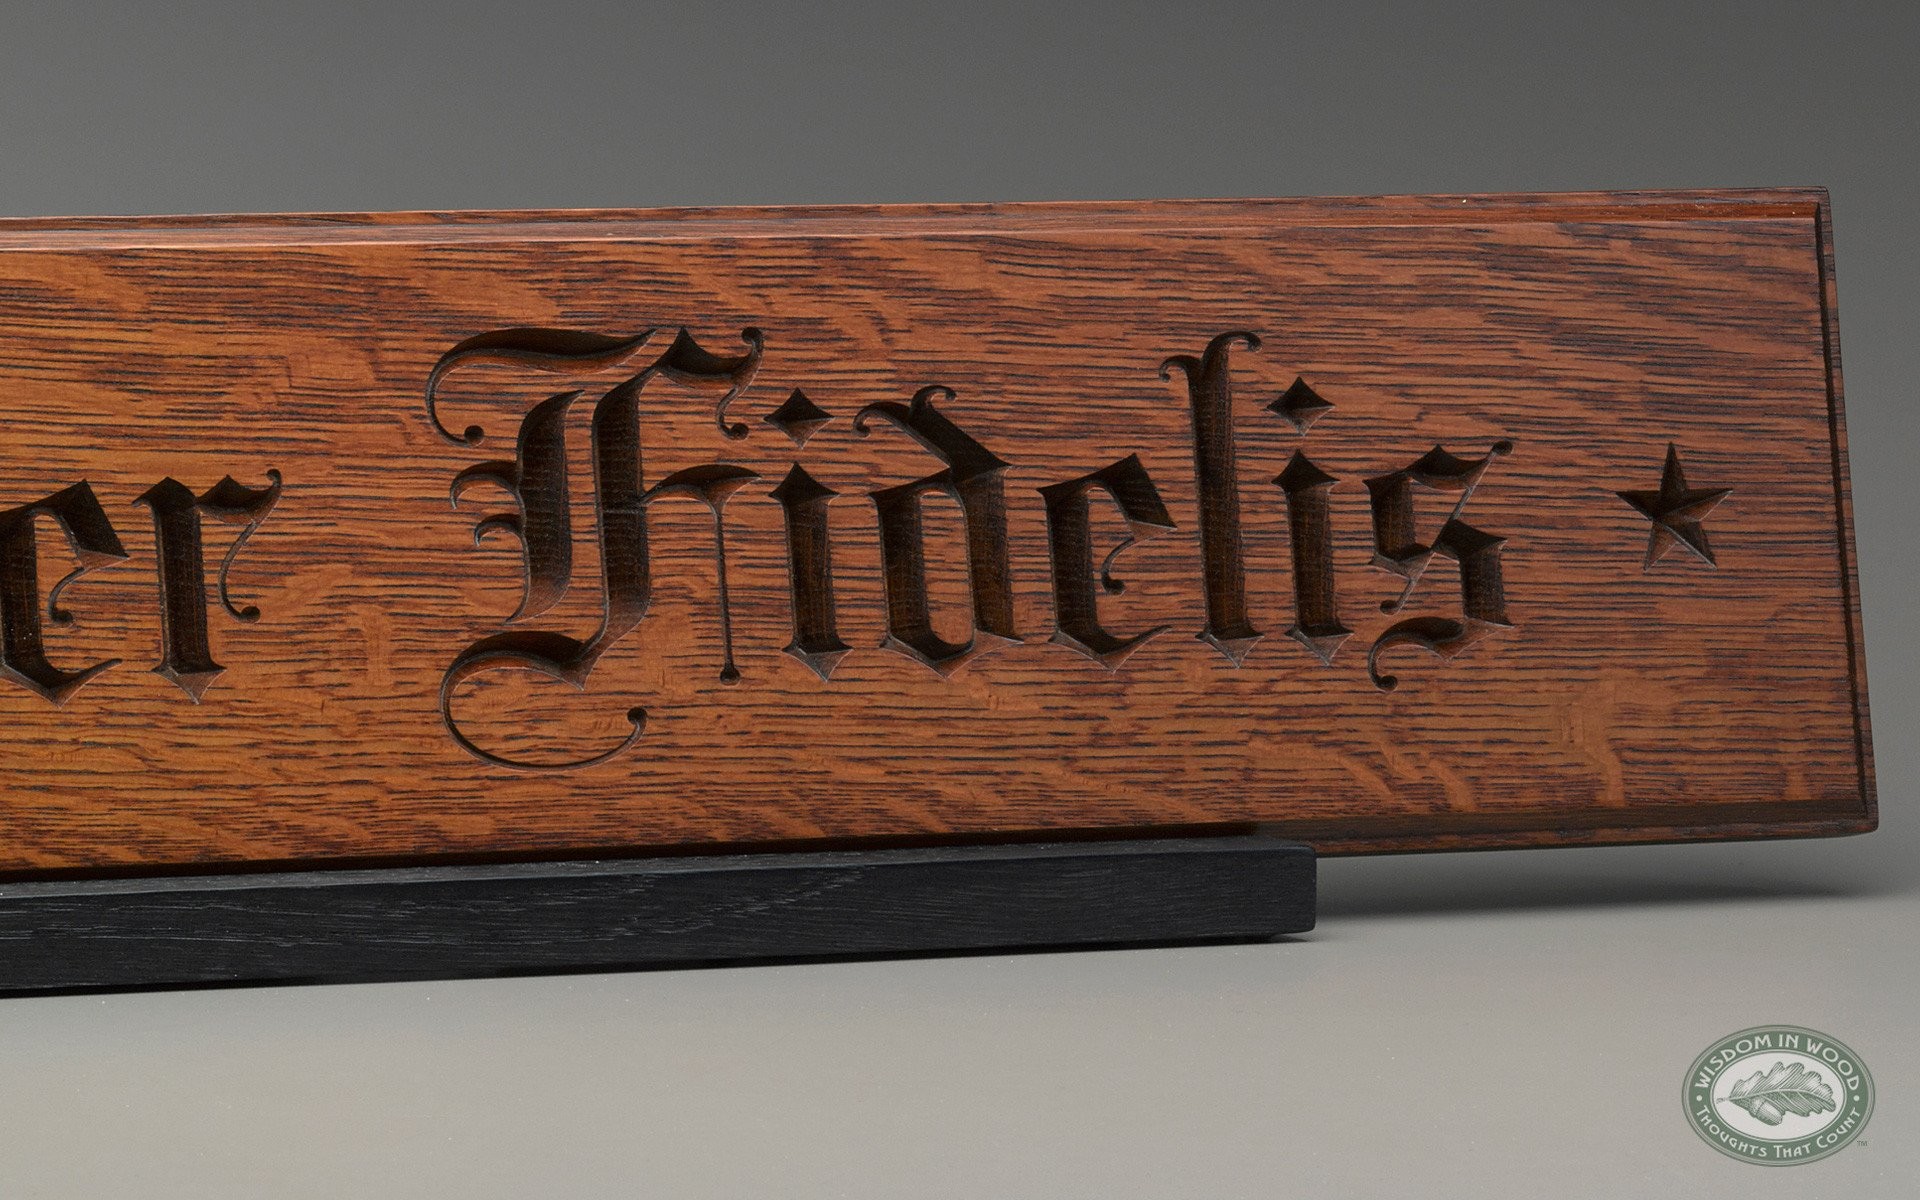 1920x1200 ... Semper Fidelis Wall Art by Wisdom In Wood Carved Quotes, Right  Close-Up, ...